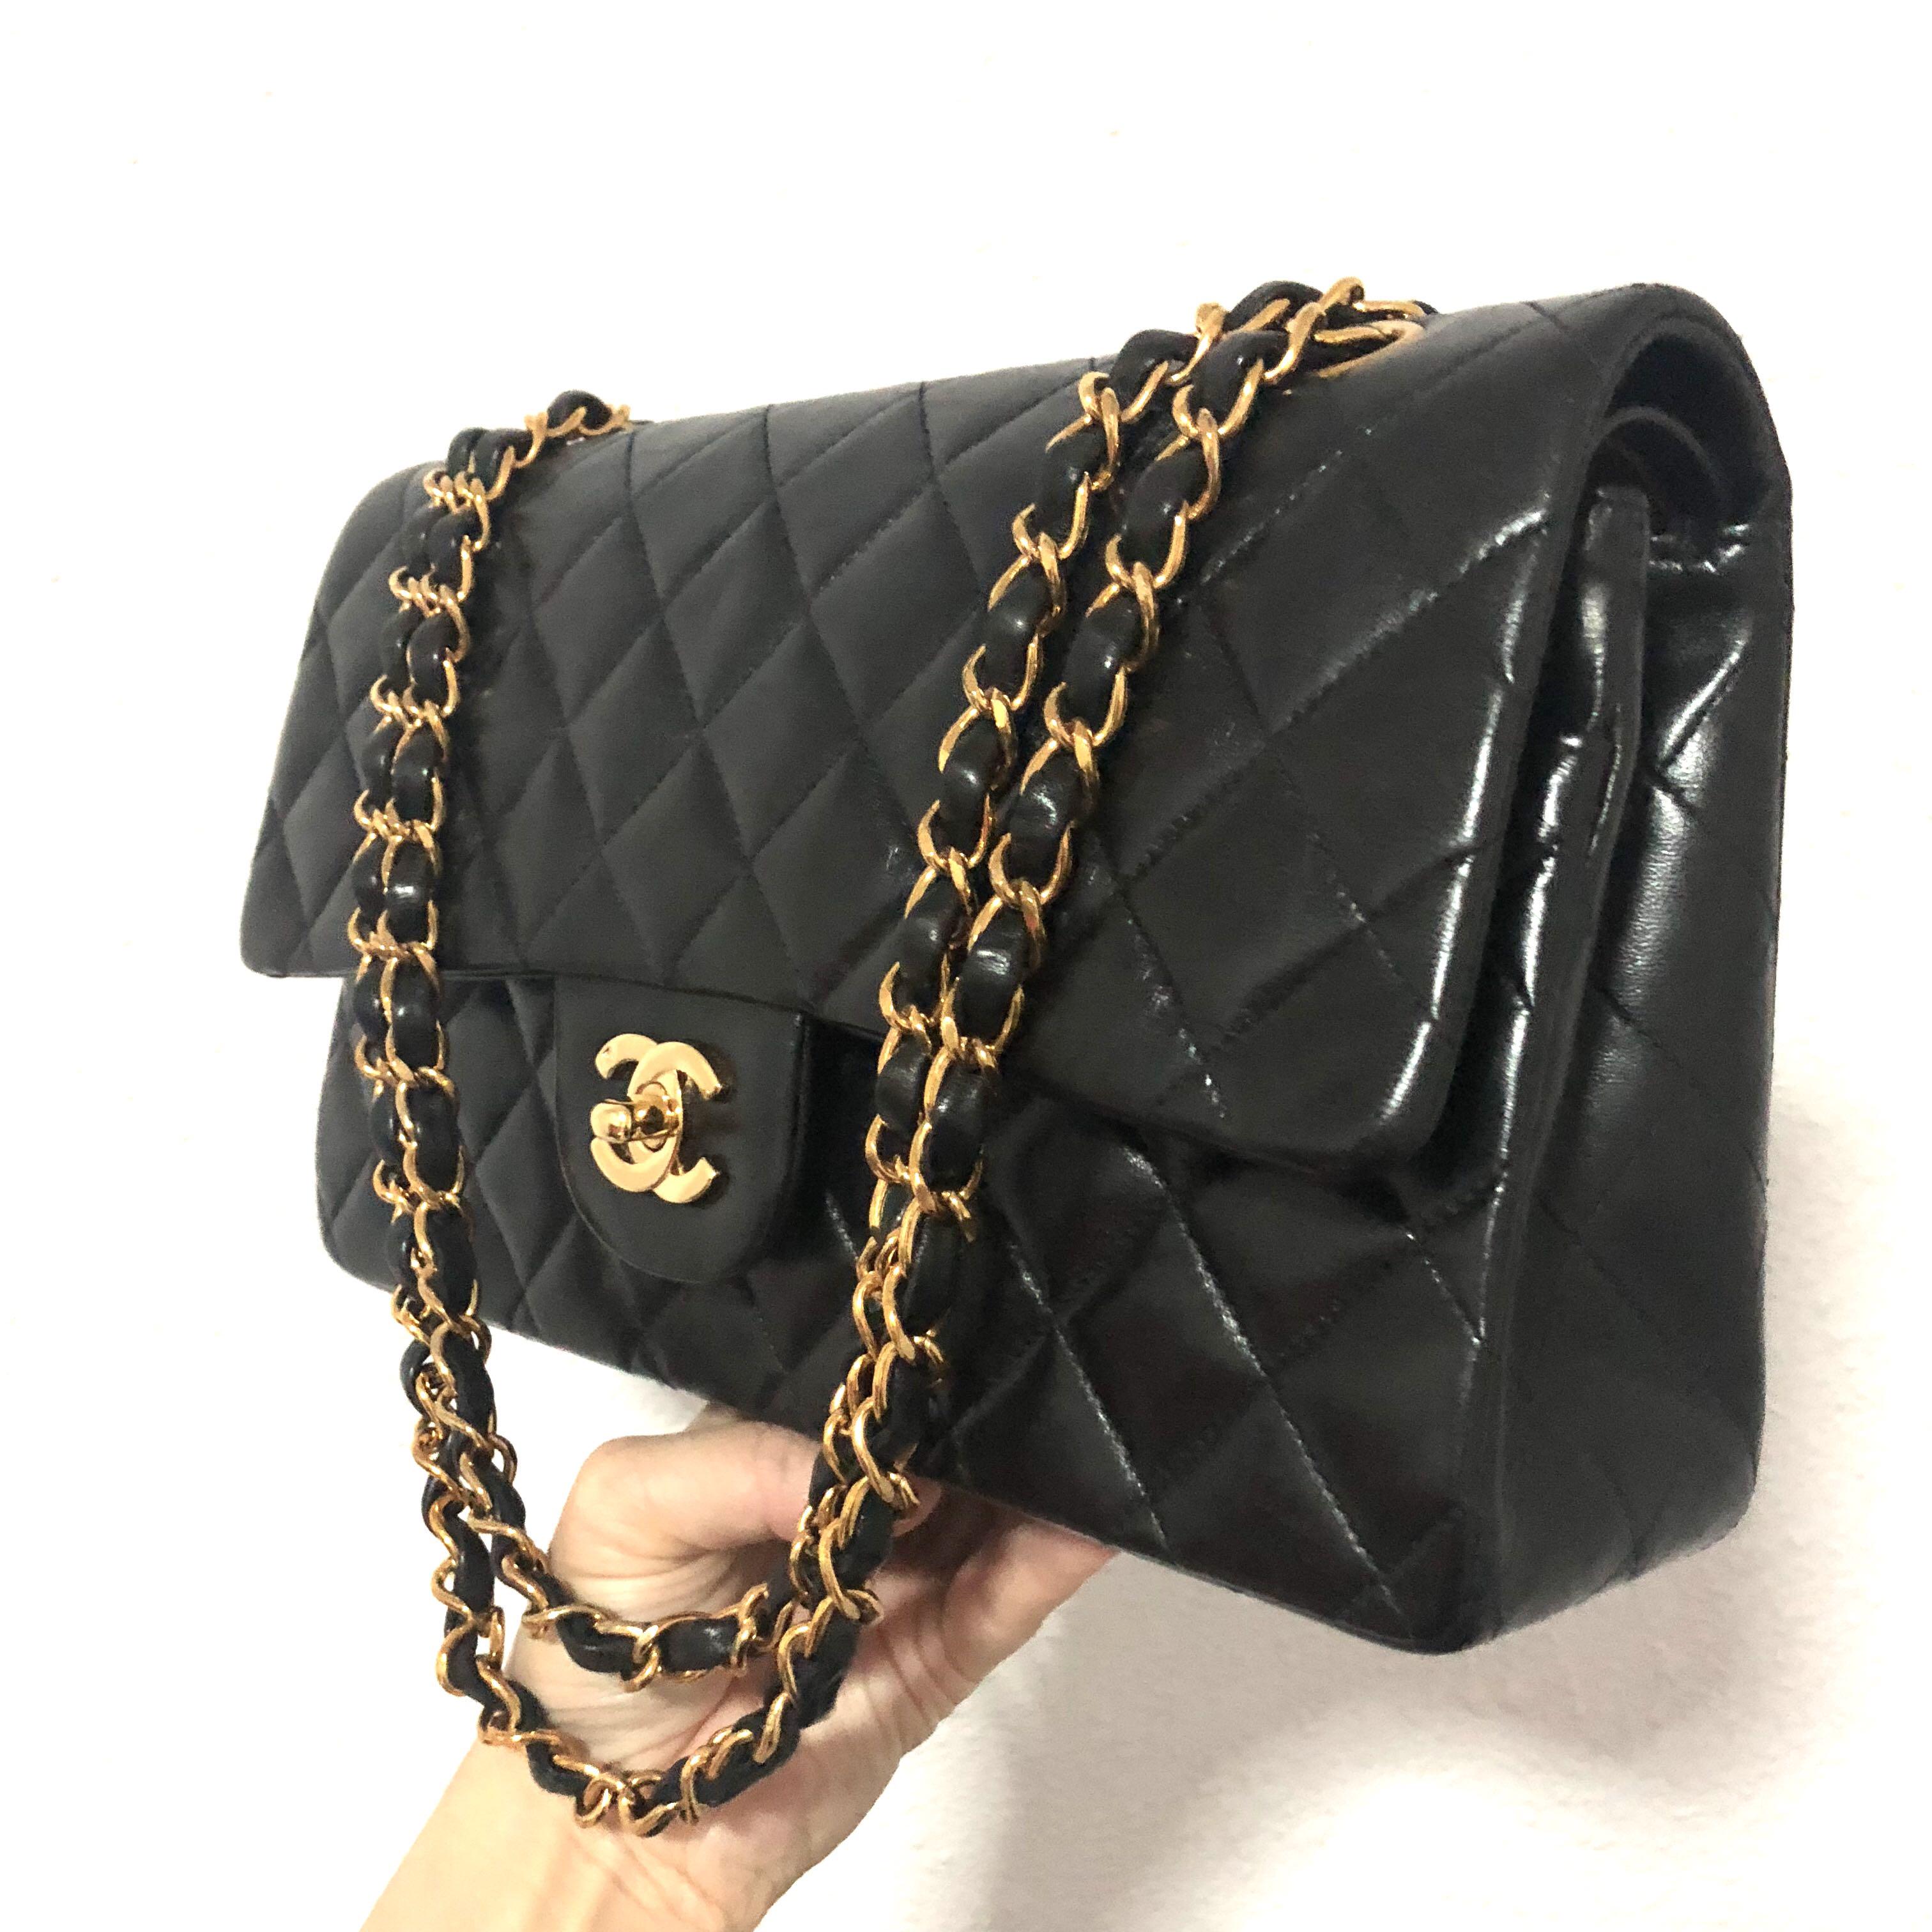 Authentic Chanel 10 inch Classic Flap Bag with 24k Gold Hardware